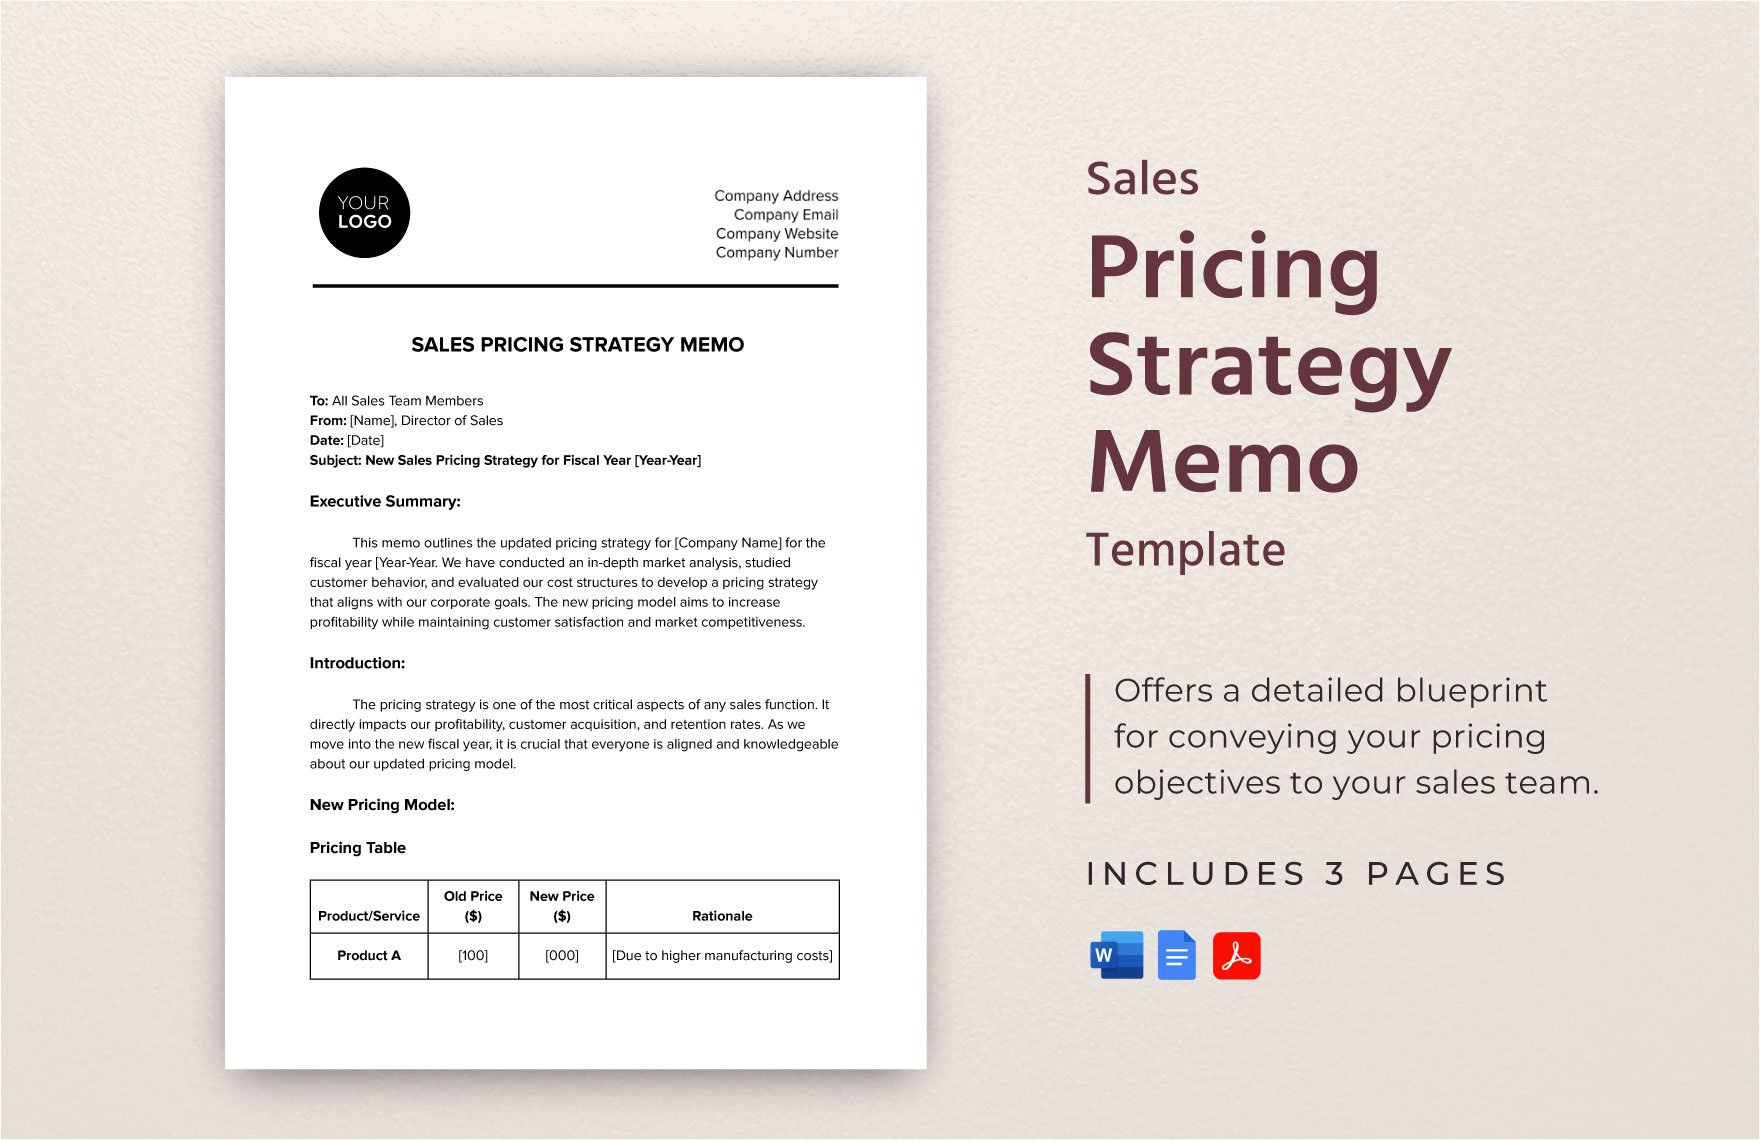 Sales Pricing Strategy Memo Template